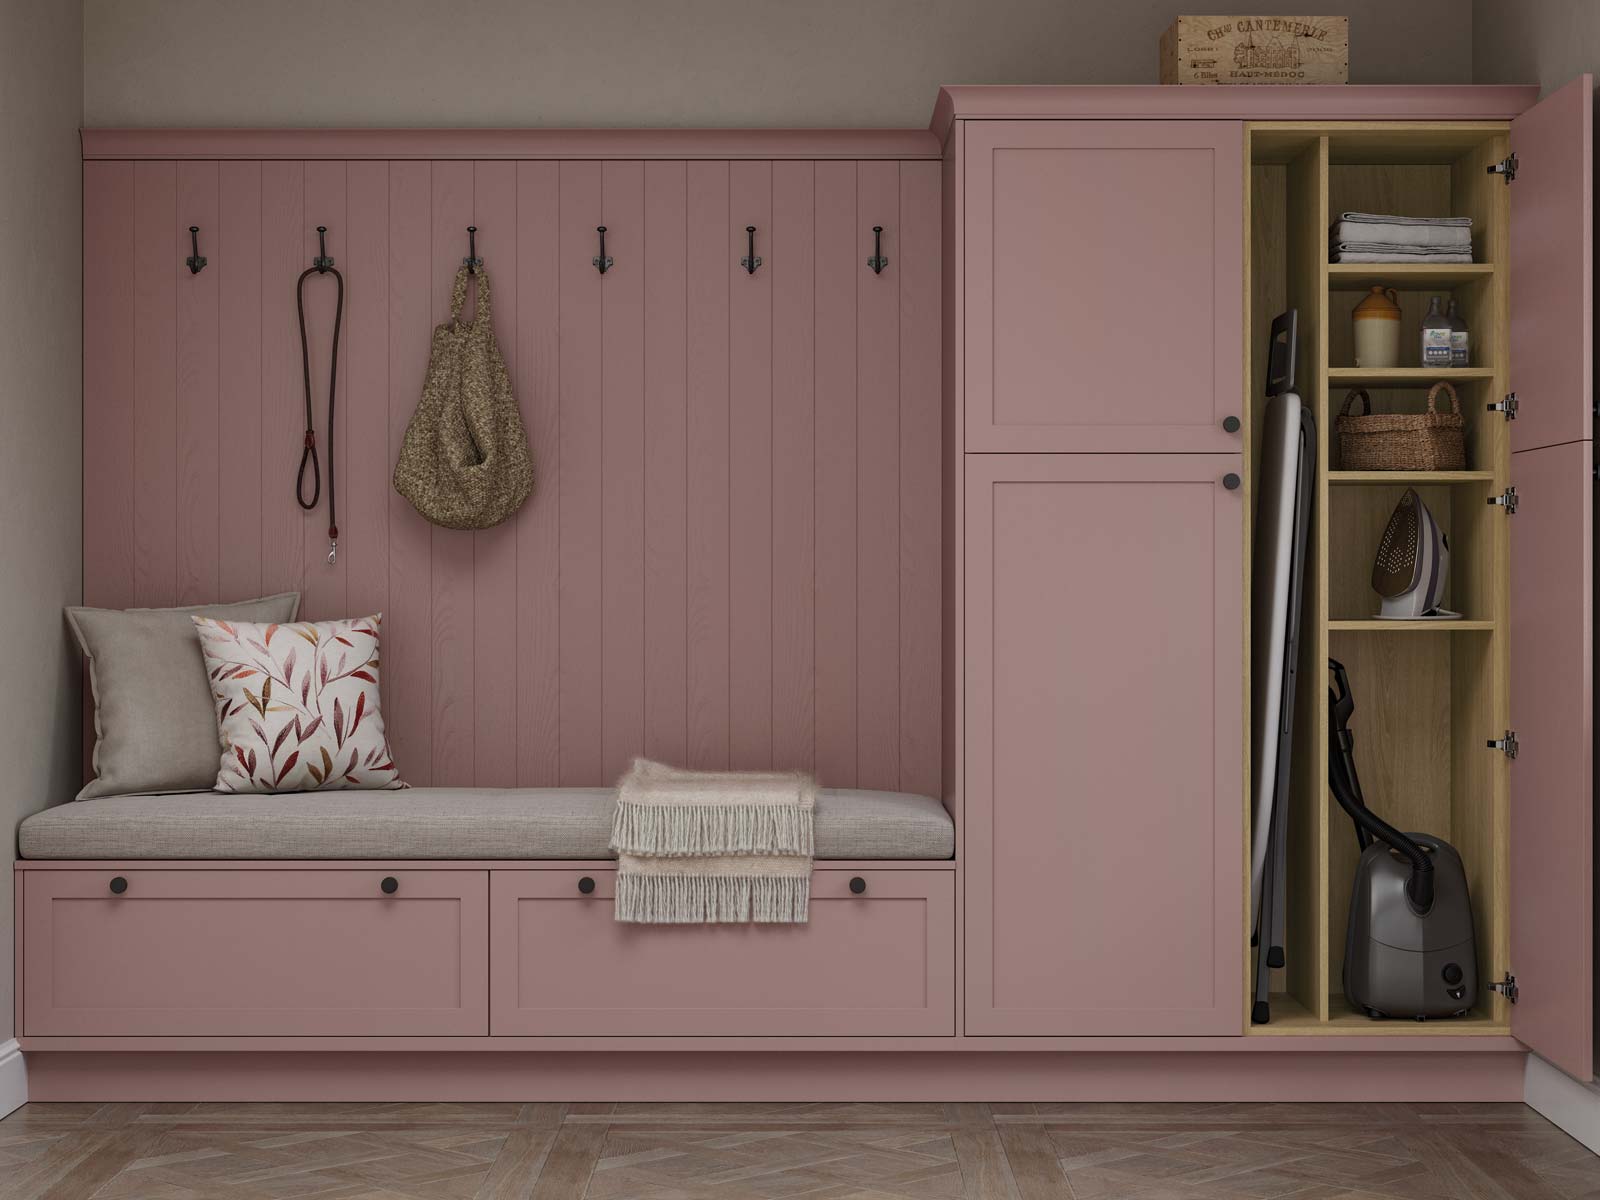 Baby pink Bloomsbury porch seat and utility room cupboard with divider